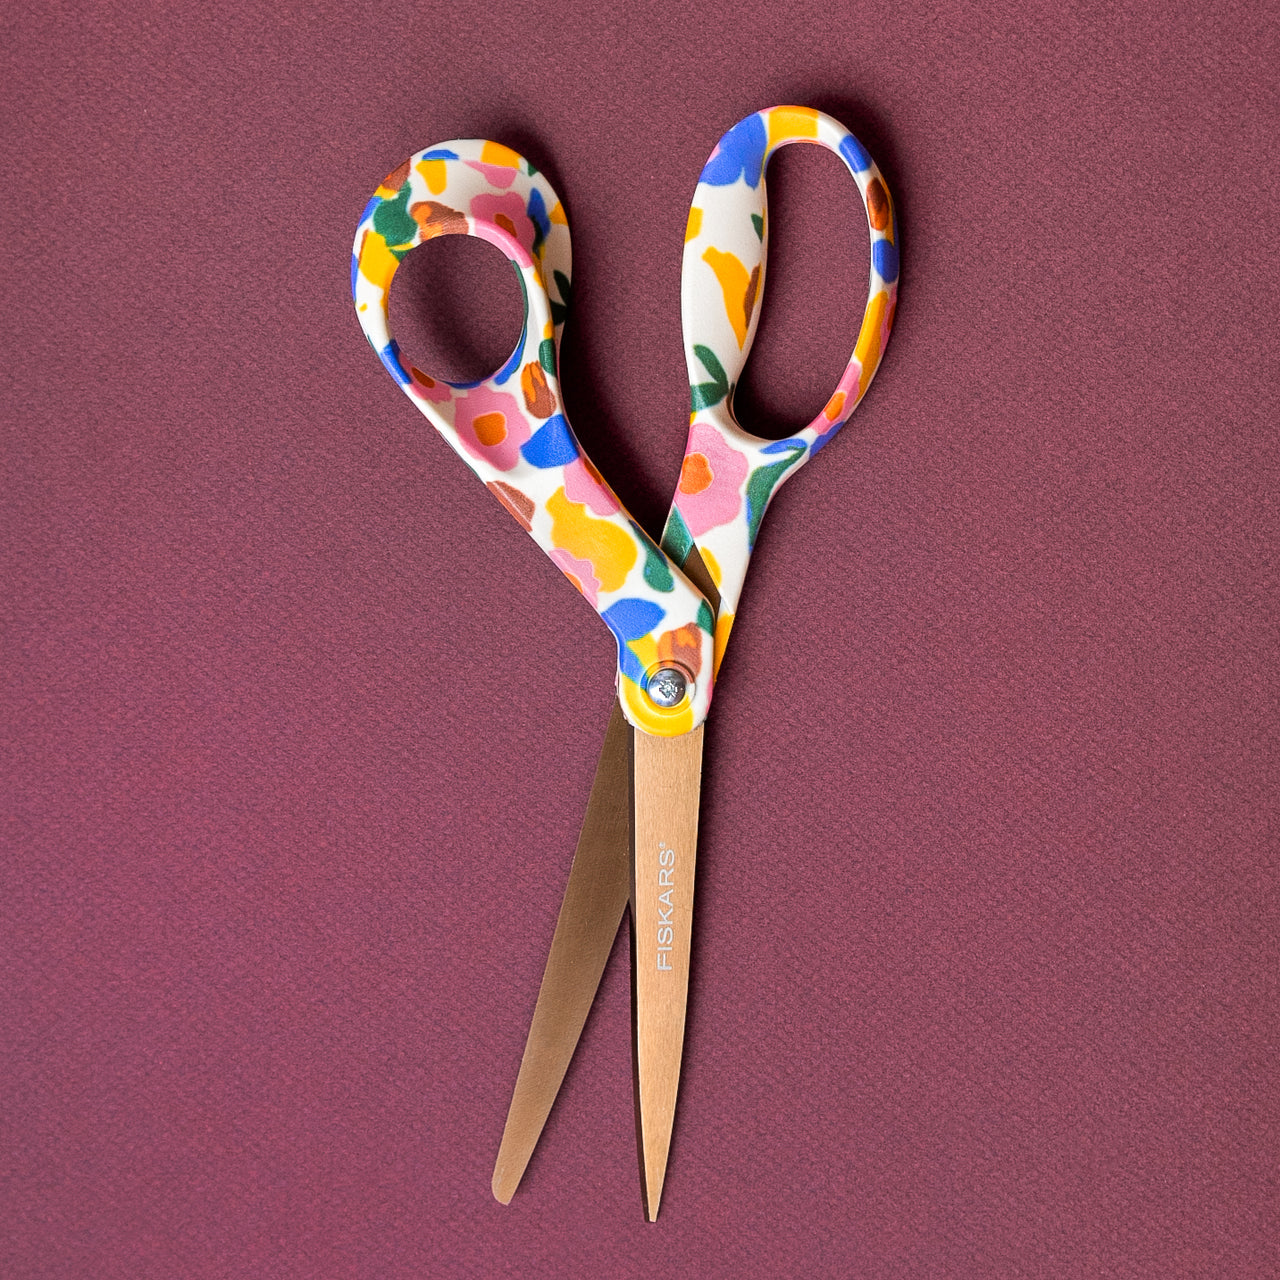 Scissors handle has playful abstract floral elements that are blue, yellow, green and pink. The blade is a bronze titanium finish.